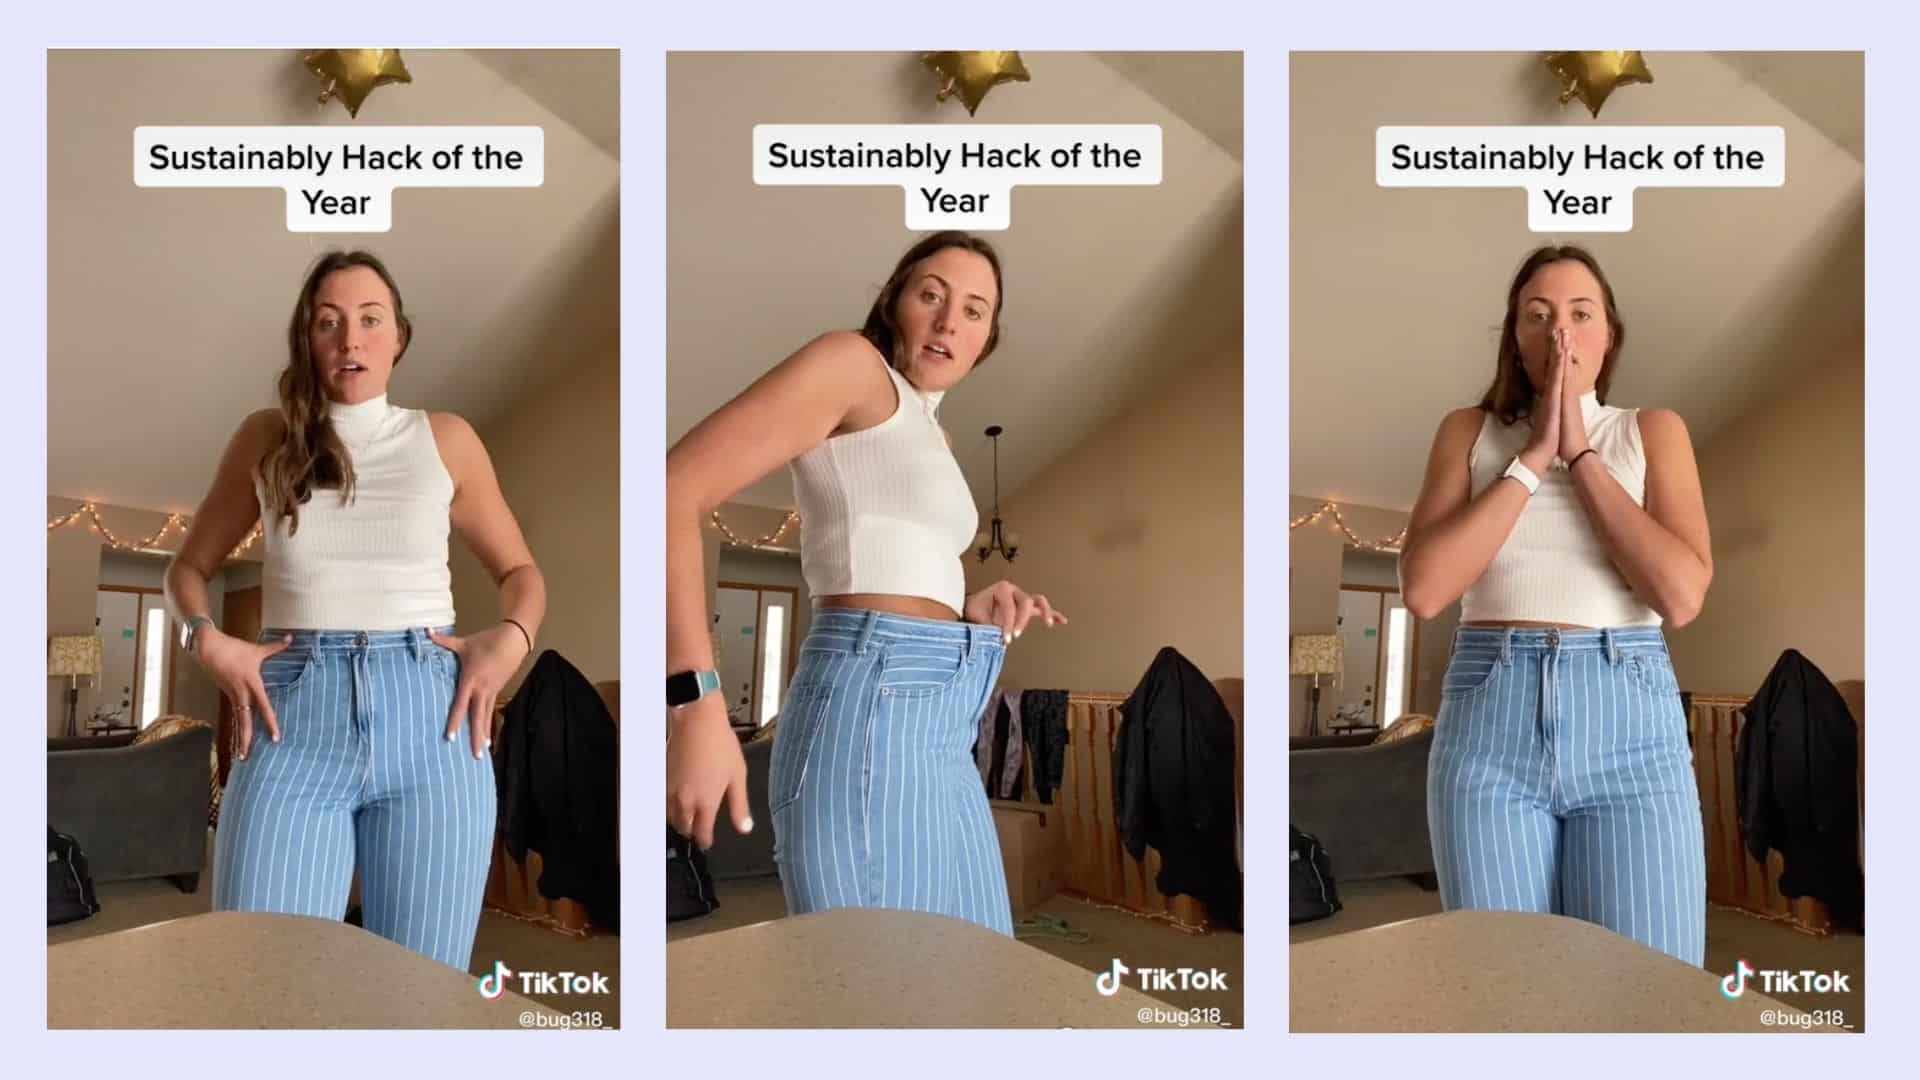 https://www.mother.ly/wp-content/uploads/2022/09/woman-showing-sustainable-jeans-hack-on-tiktok.jpg